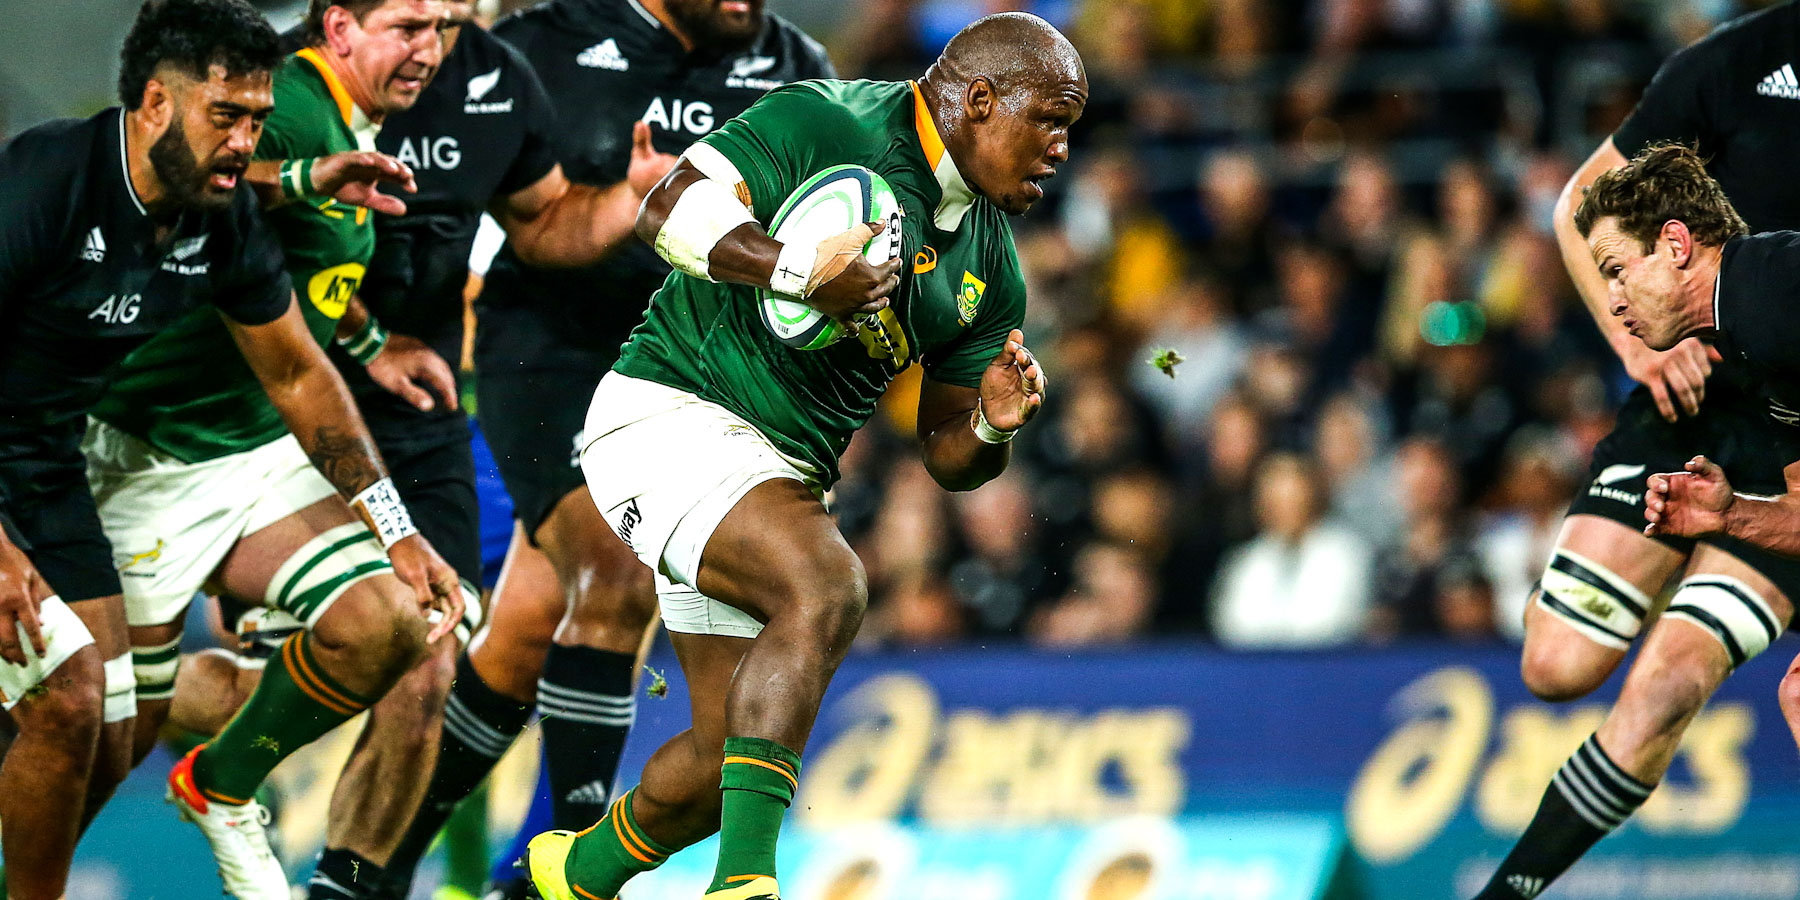 Bongi Mbonambi will earn his 50th Test cap for South Africa at DHL Stadium this weekend.